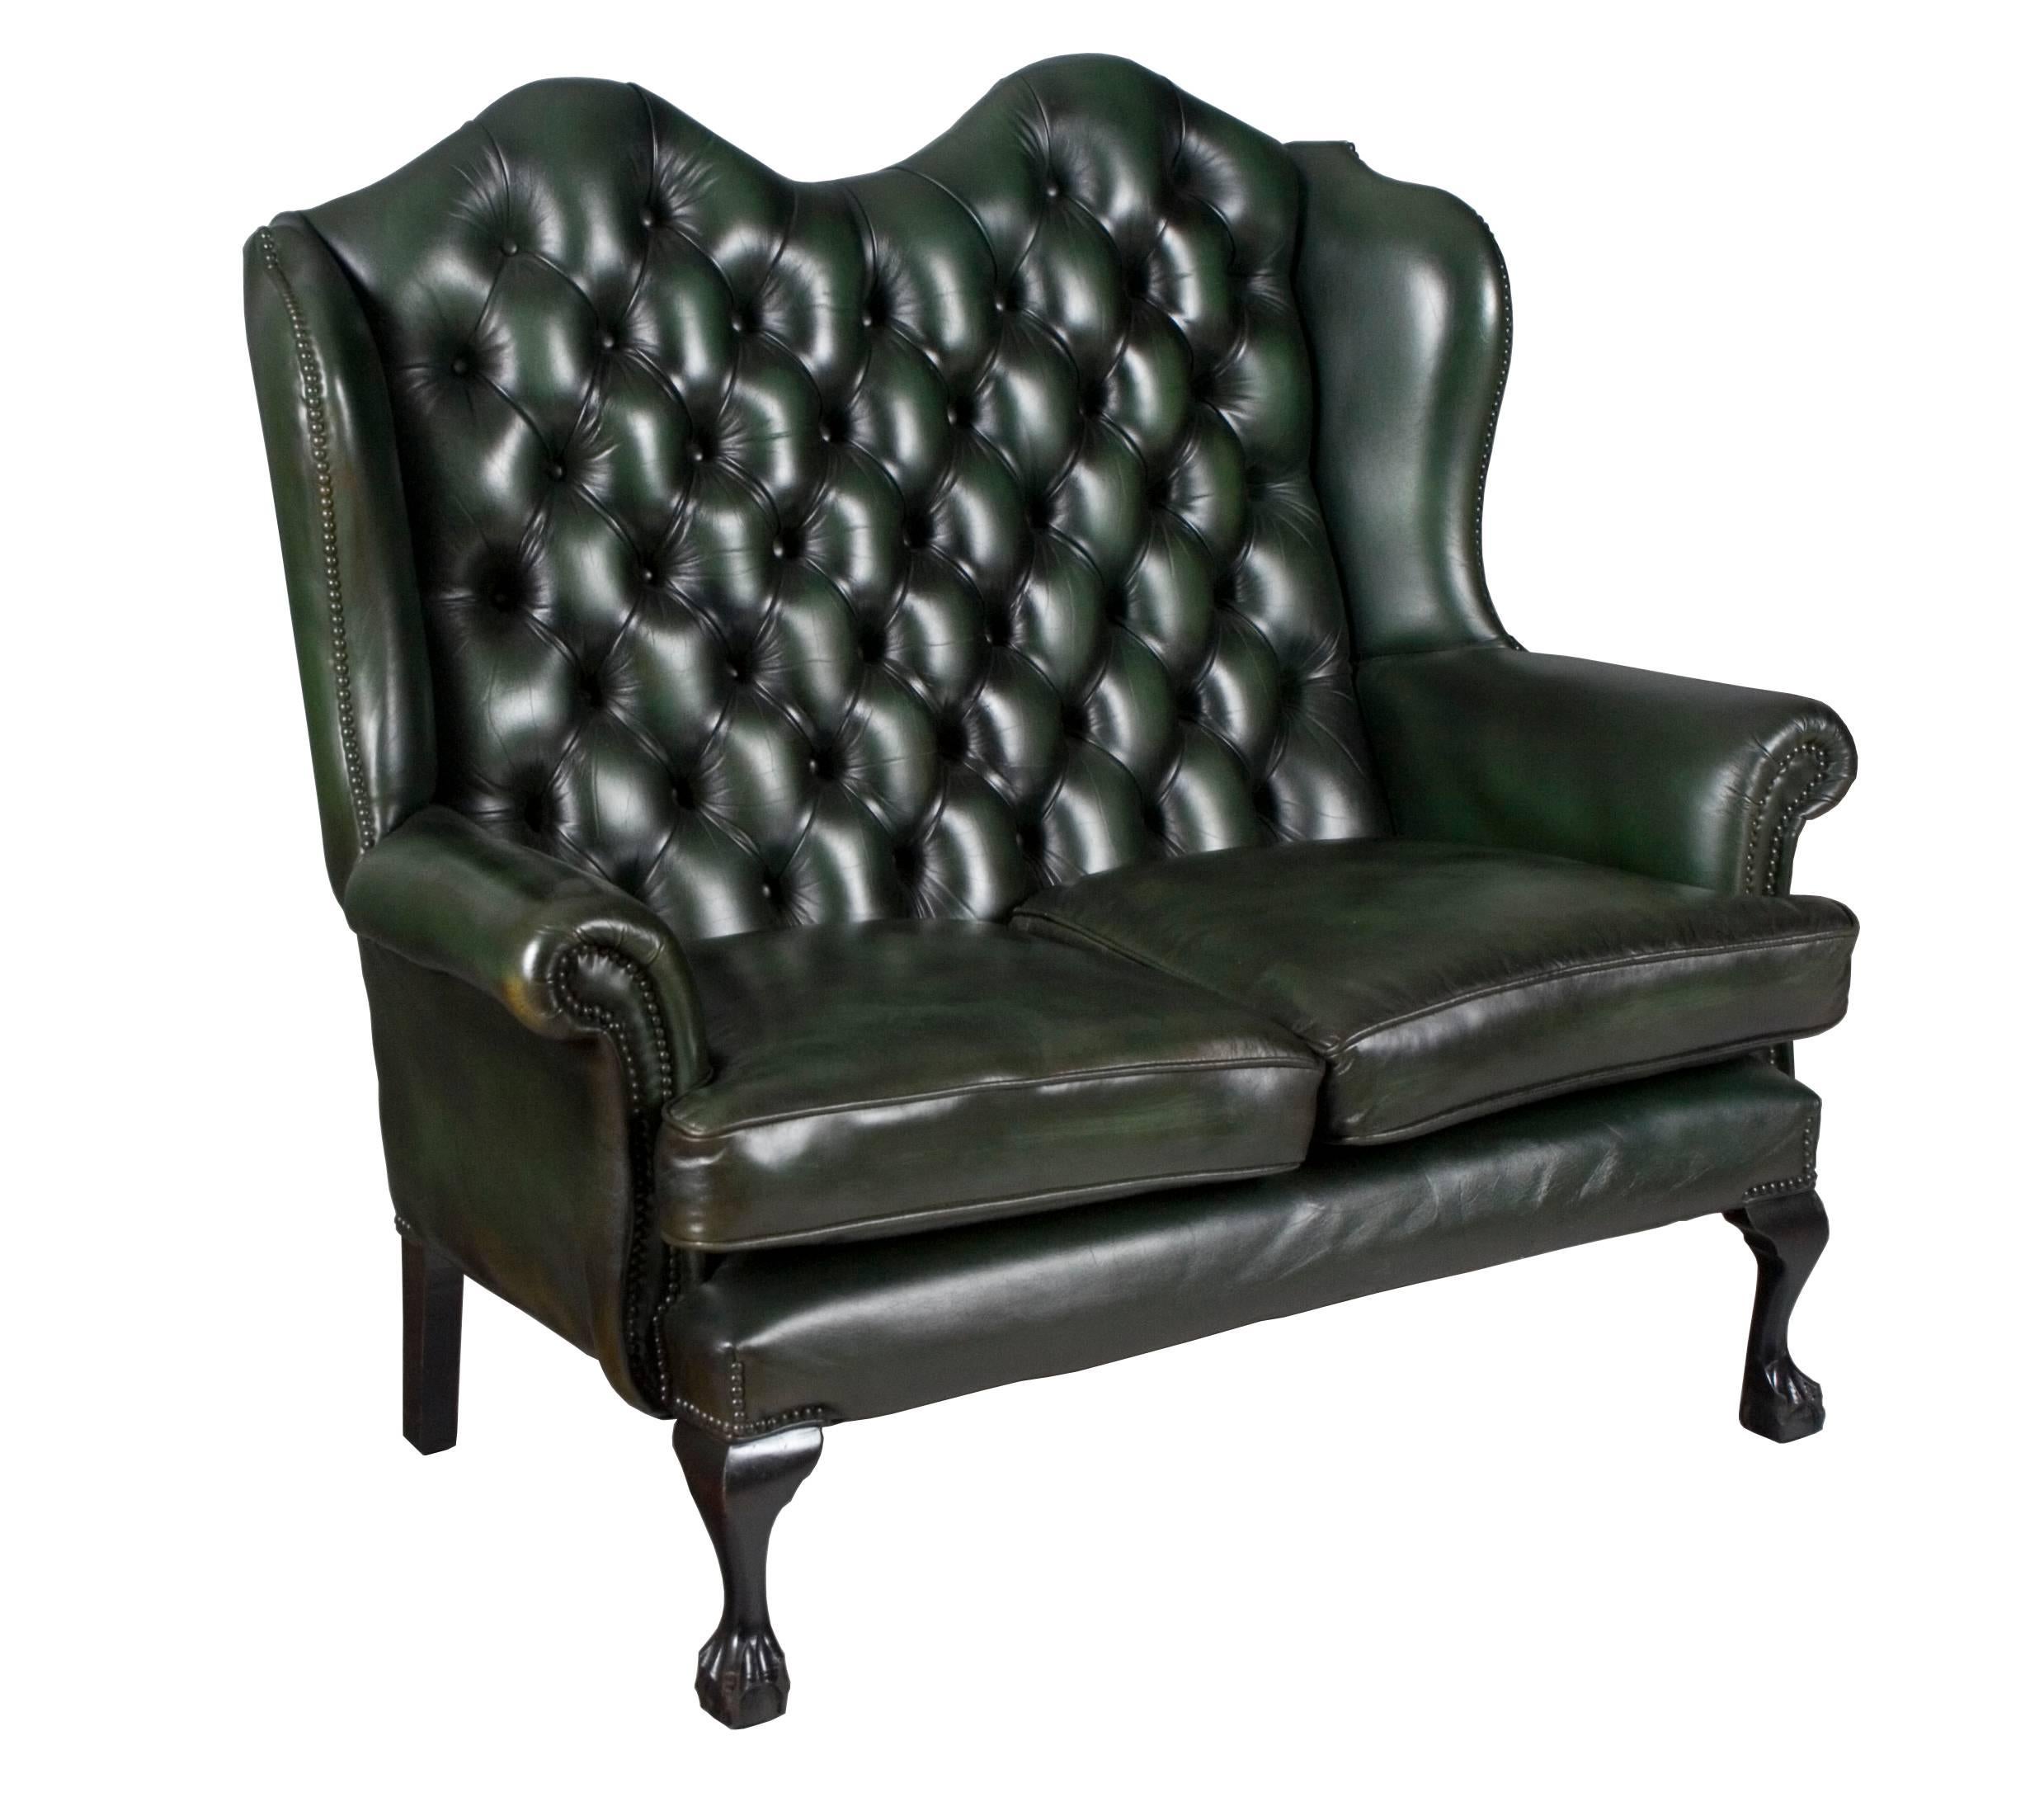 Vintage Green Tufted Leather Queen Anne Style Loveseat For Sale